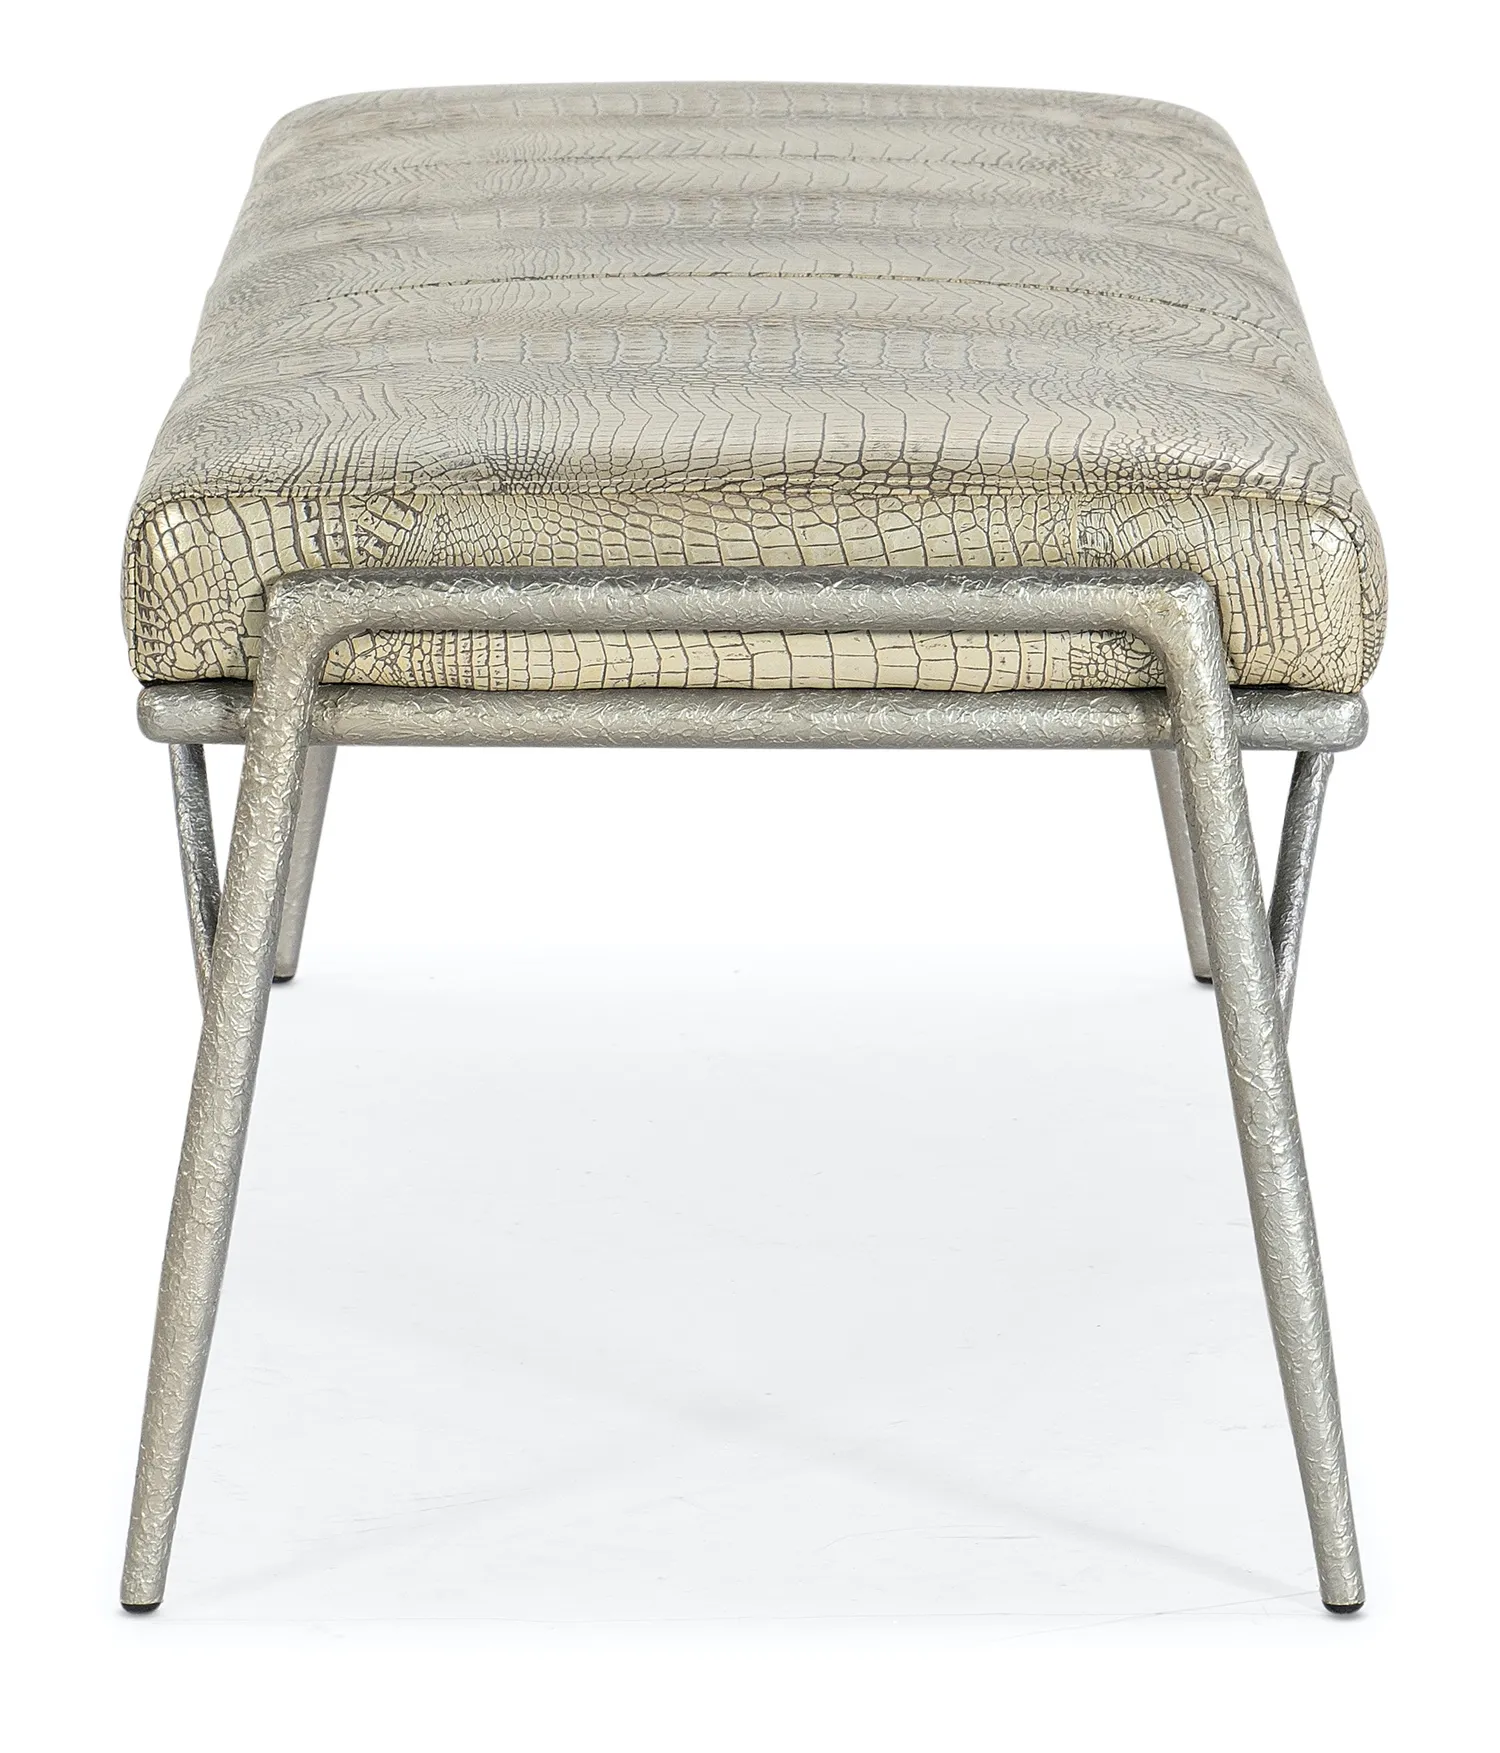 PEARLY GATOR SUBLIME TALE LEATHER BENCH